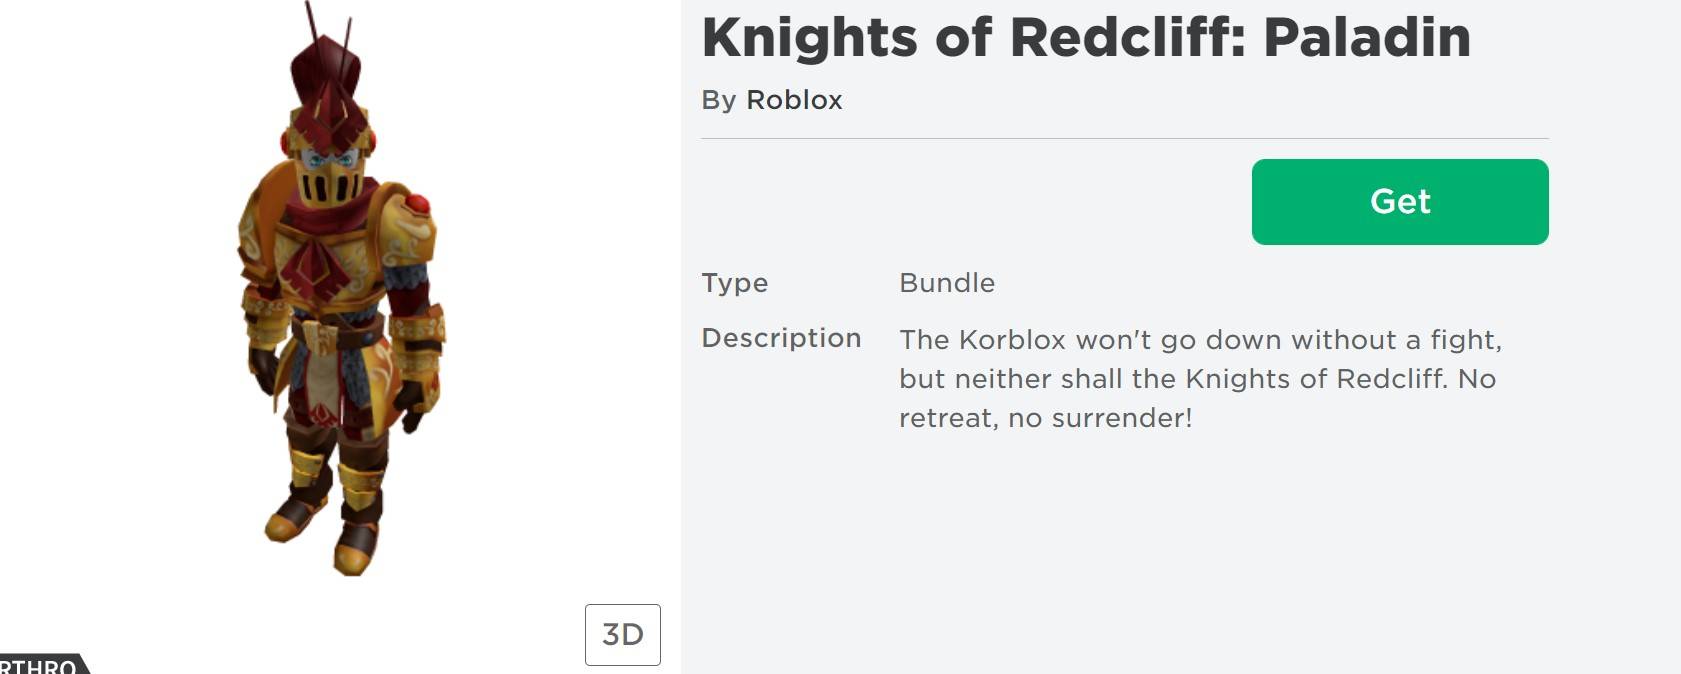 Roblox Promo Codes For Free Items In June 2021 - how to get free stuff on roblox 2021 december